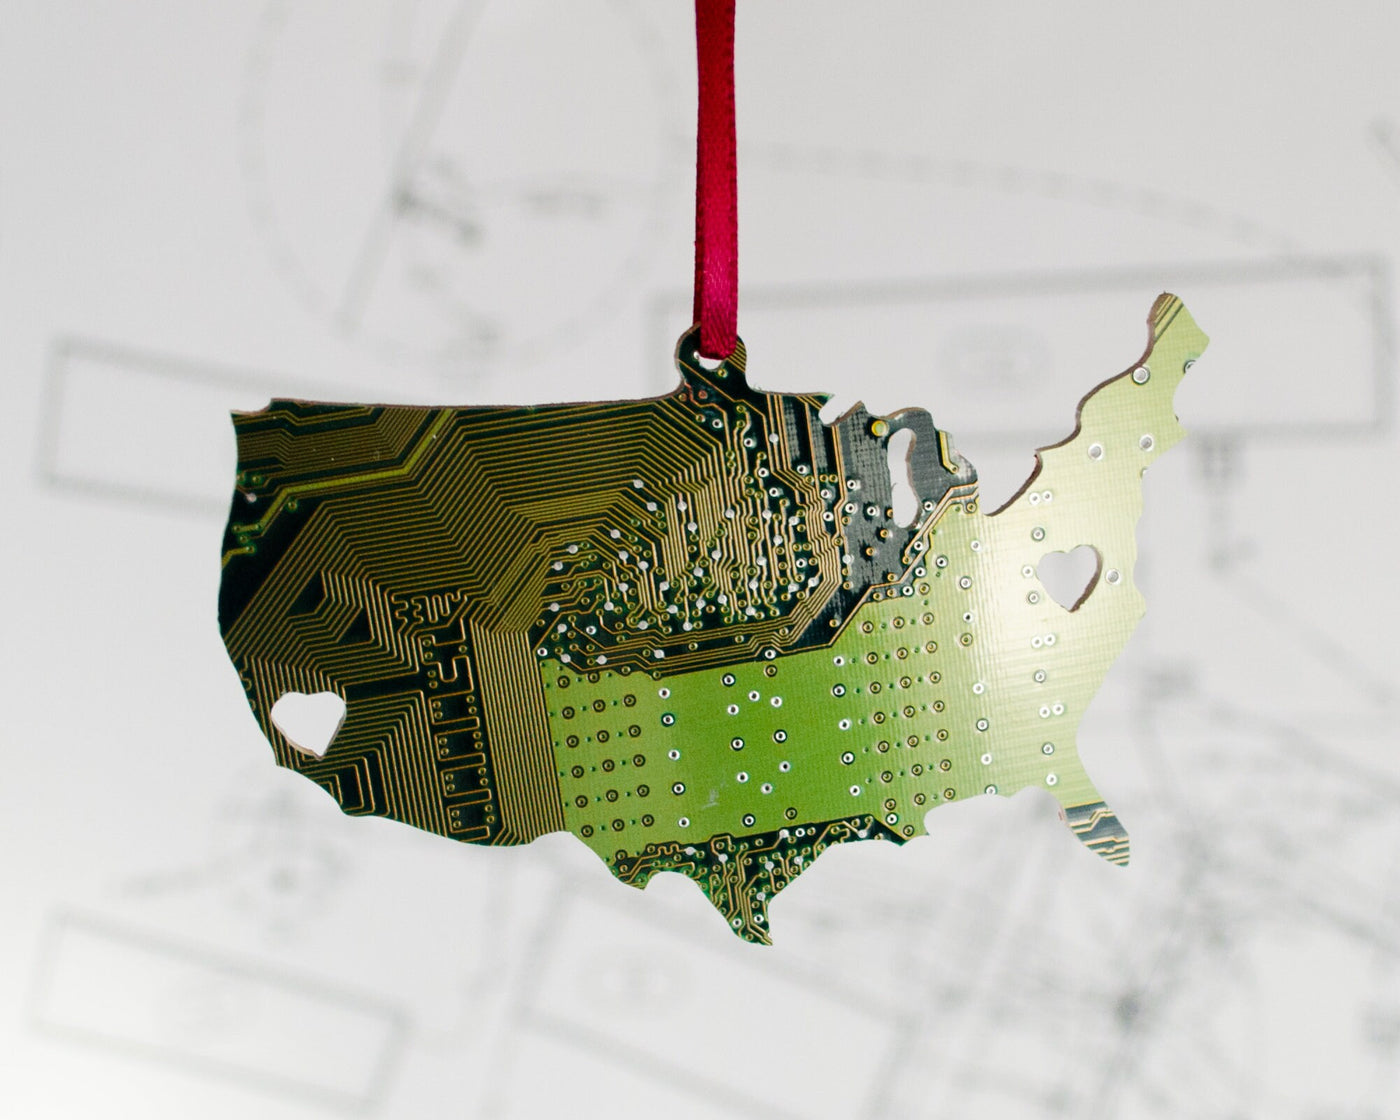 Circuit Board Ornament USA, Geeky Personalized America Christmas Ornament, Computer Engineer Gift, Holiday Garland Decor, Hostess Gift